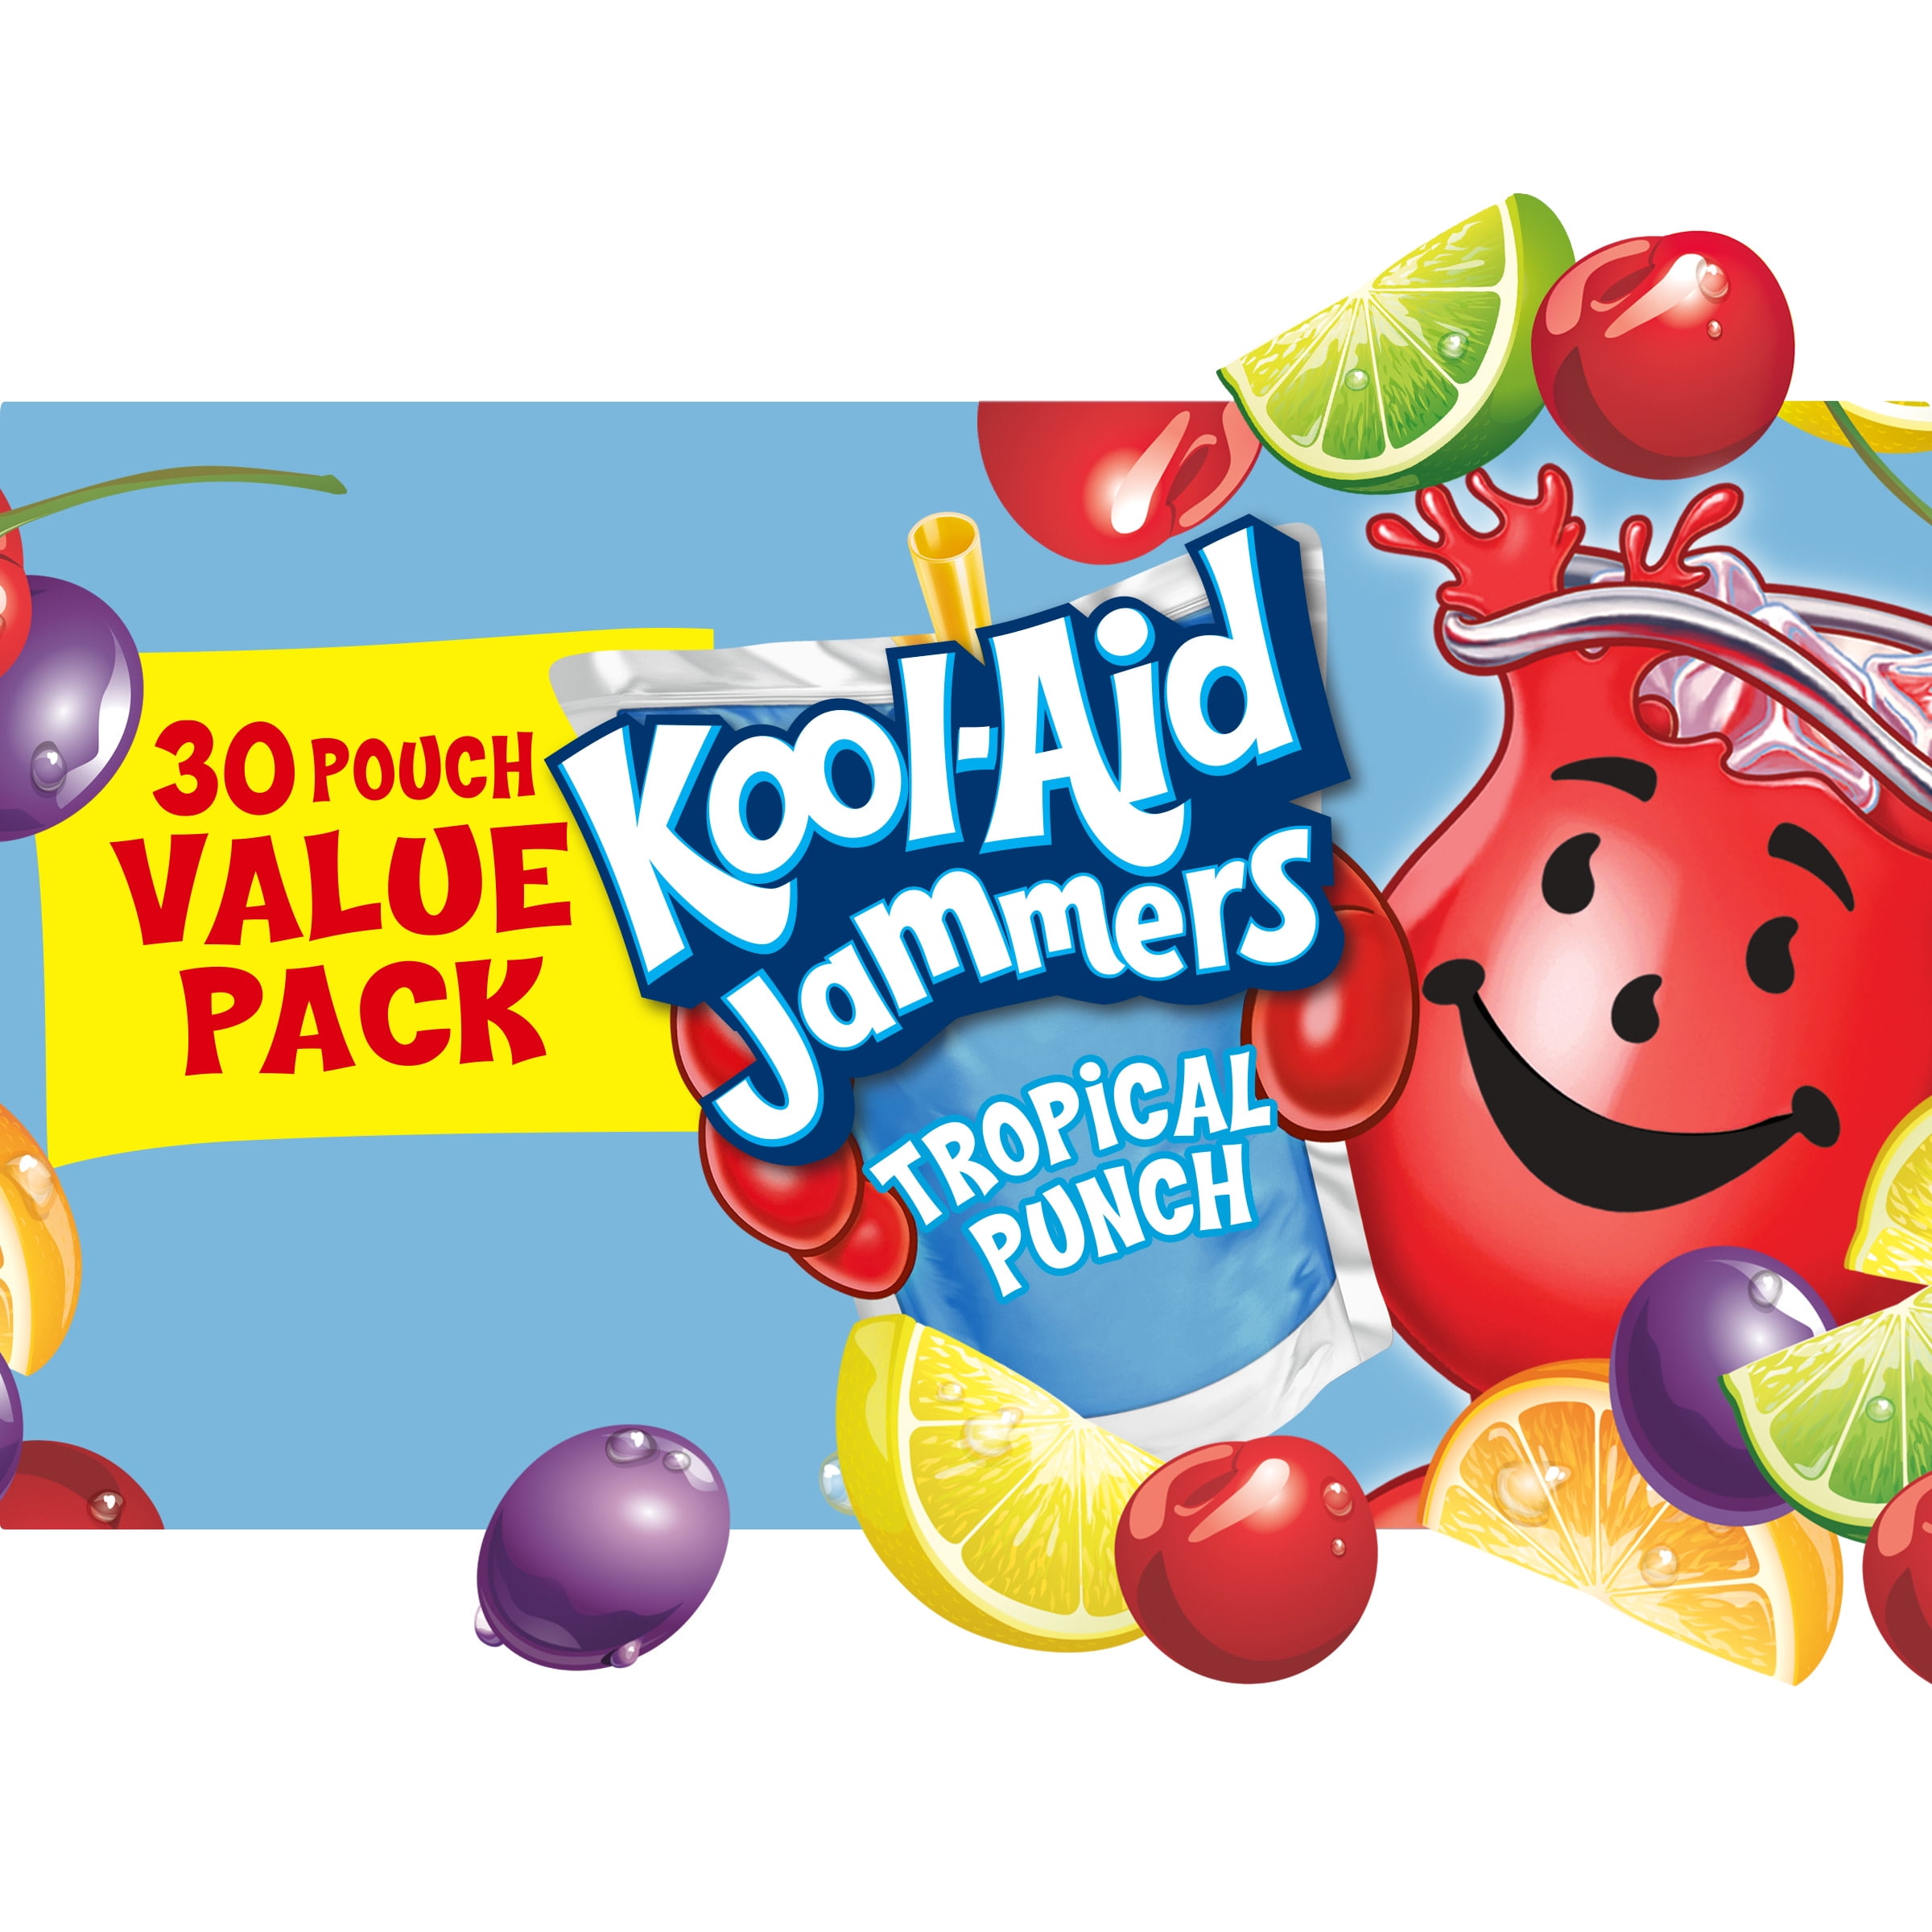 Kool Aid Jammers Tropical Punch Kids Drink 0% Juice Box Pouches Value Pack, 30 Ct Box, 6 fl oz Pouches